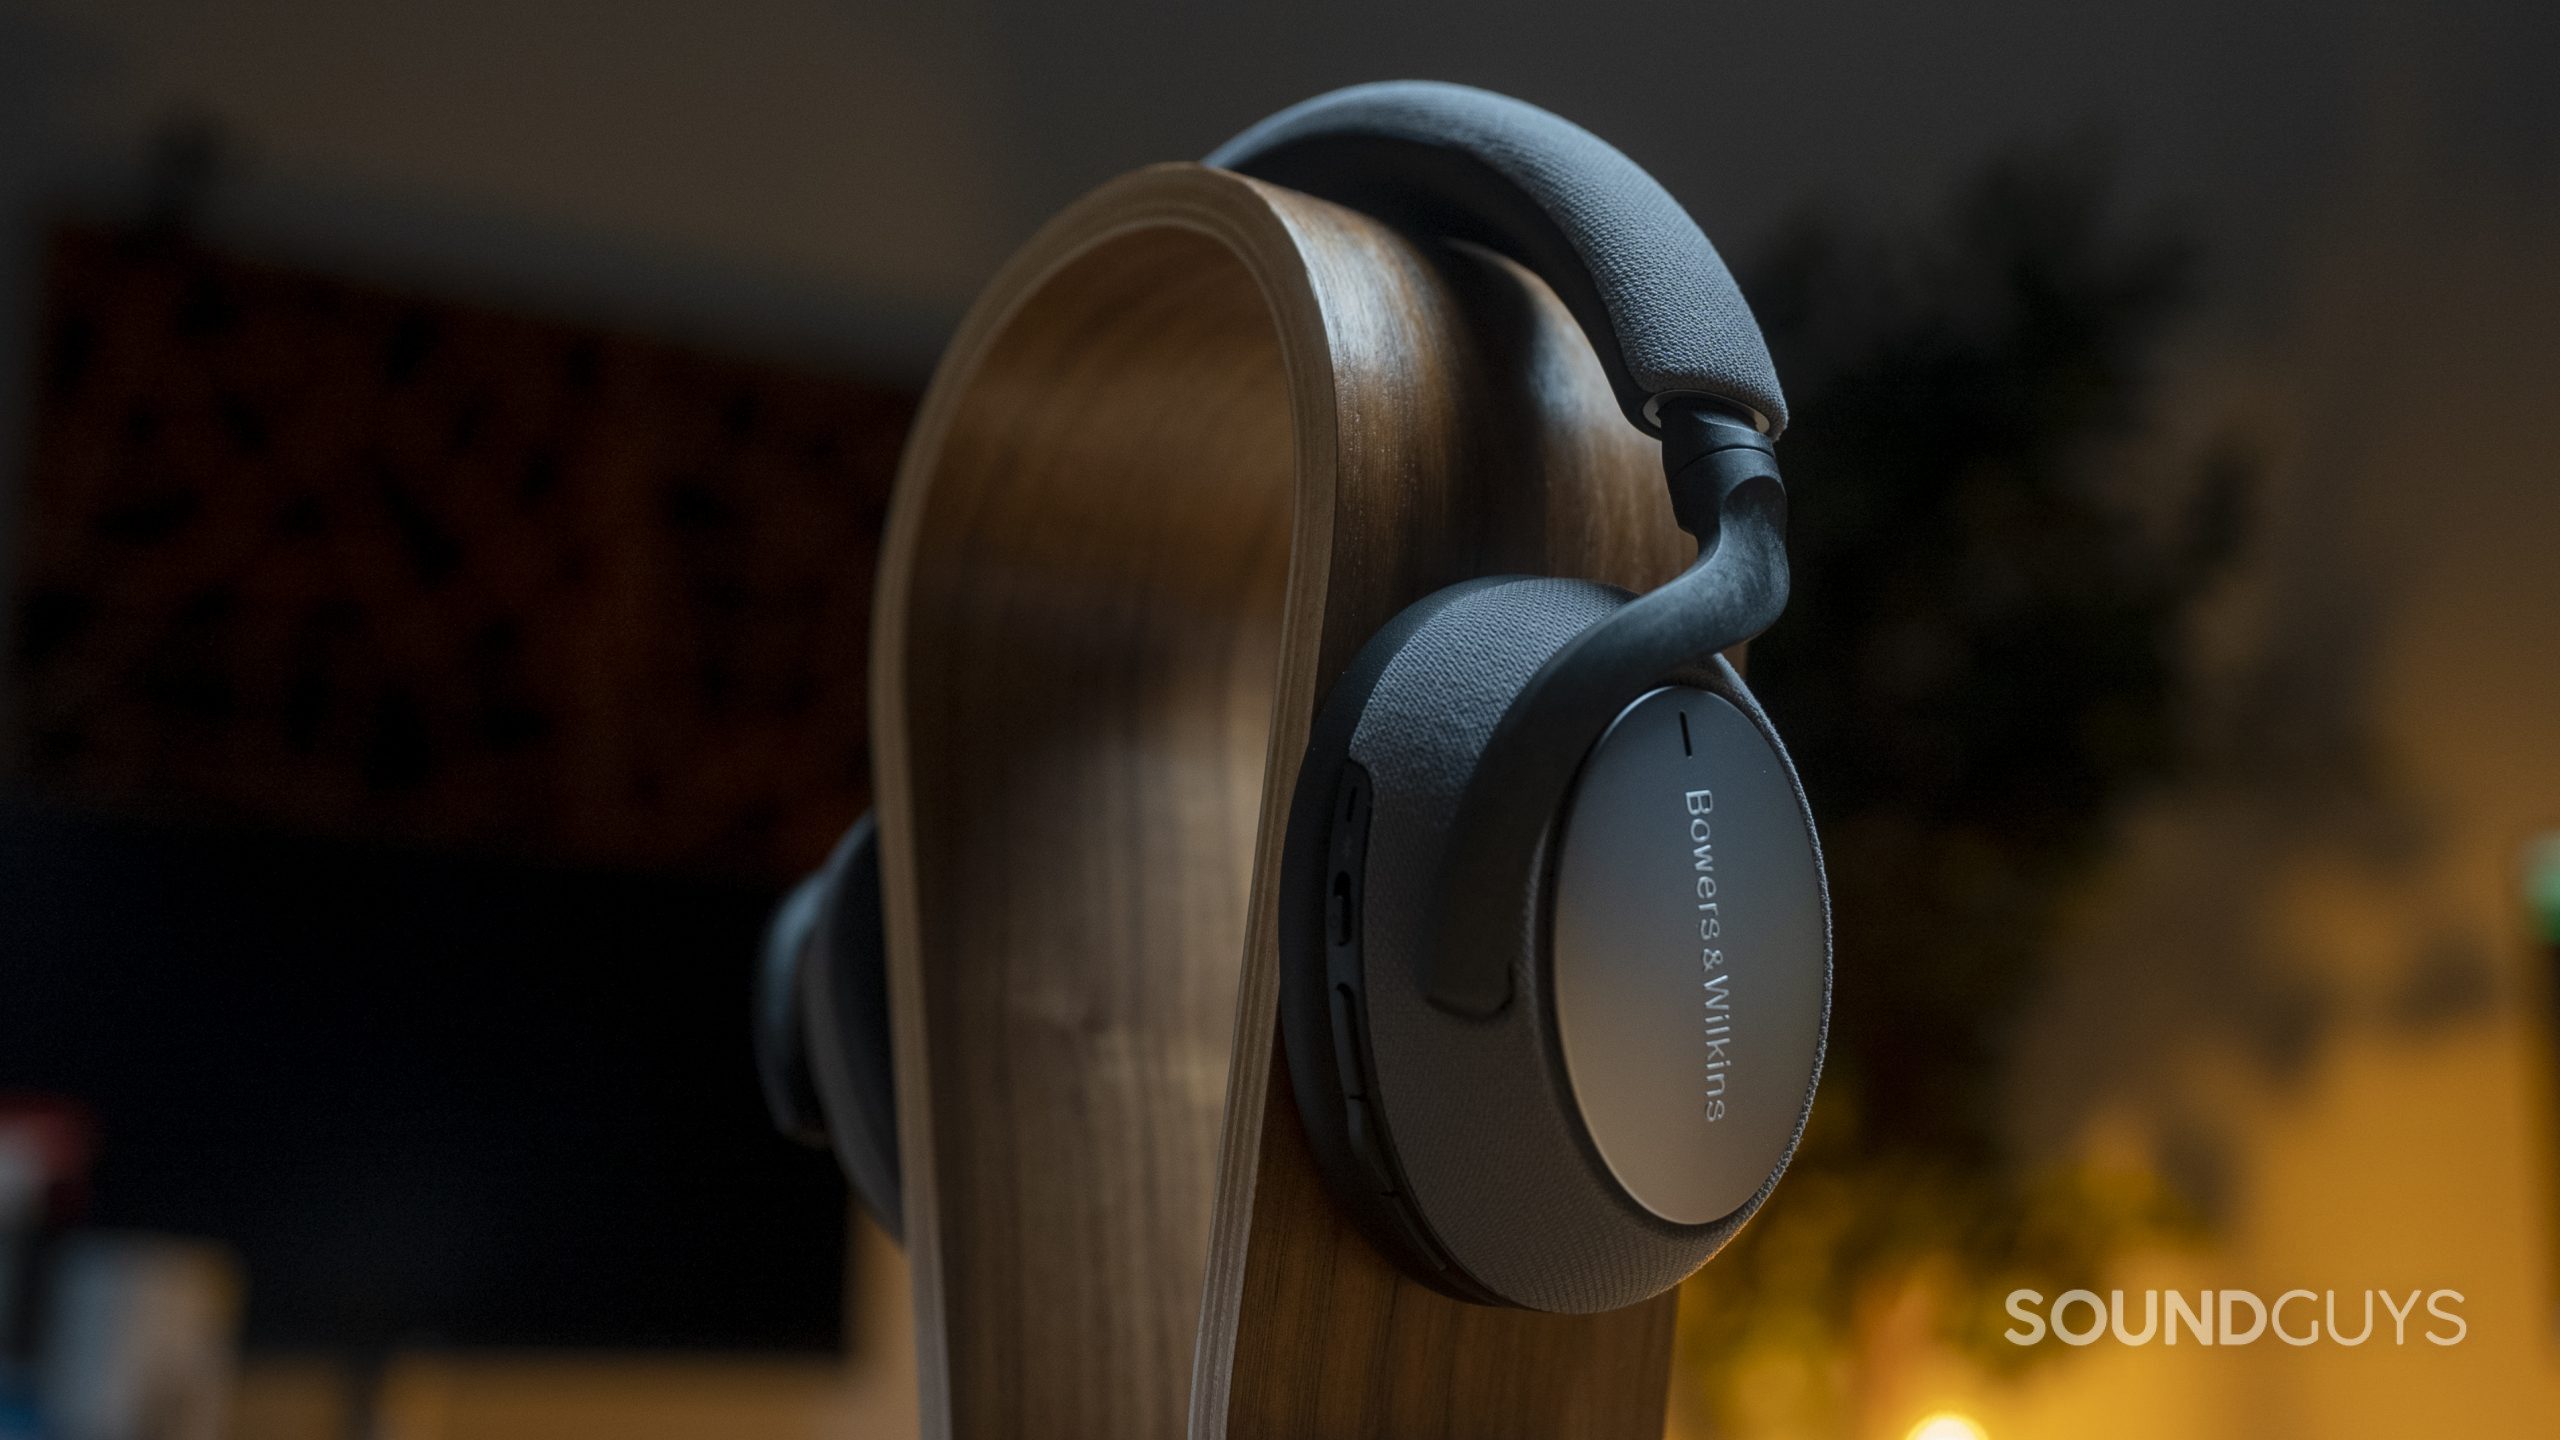 The Bowers &amp; Wilkins PX7 sitting on an omega-shaped headphone stand.